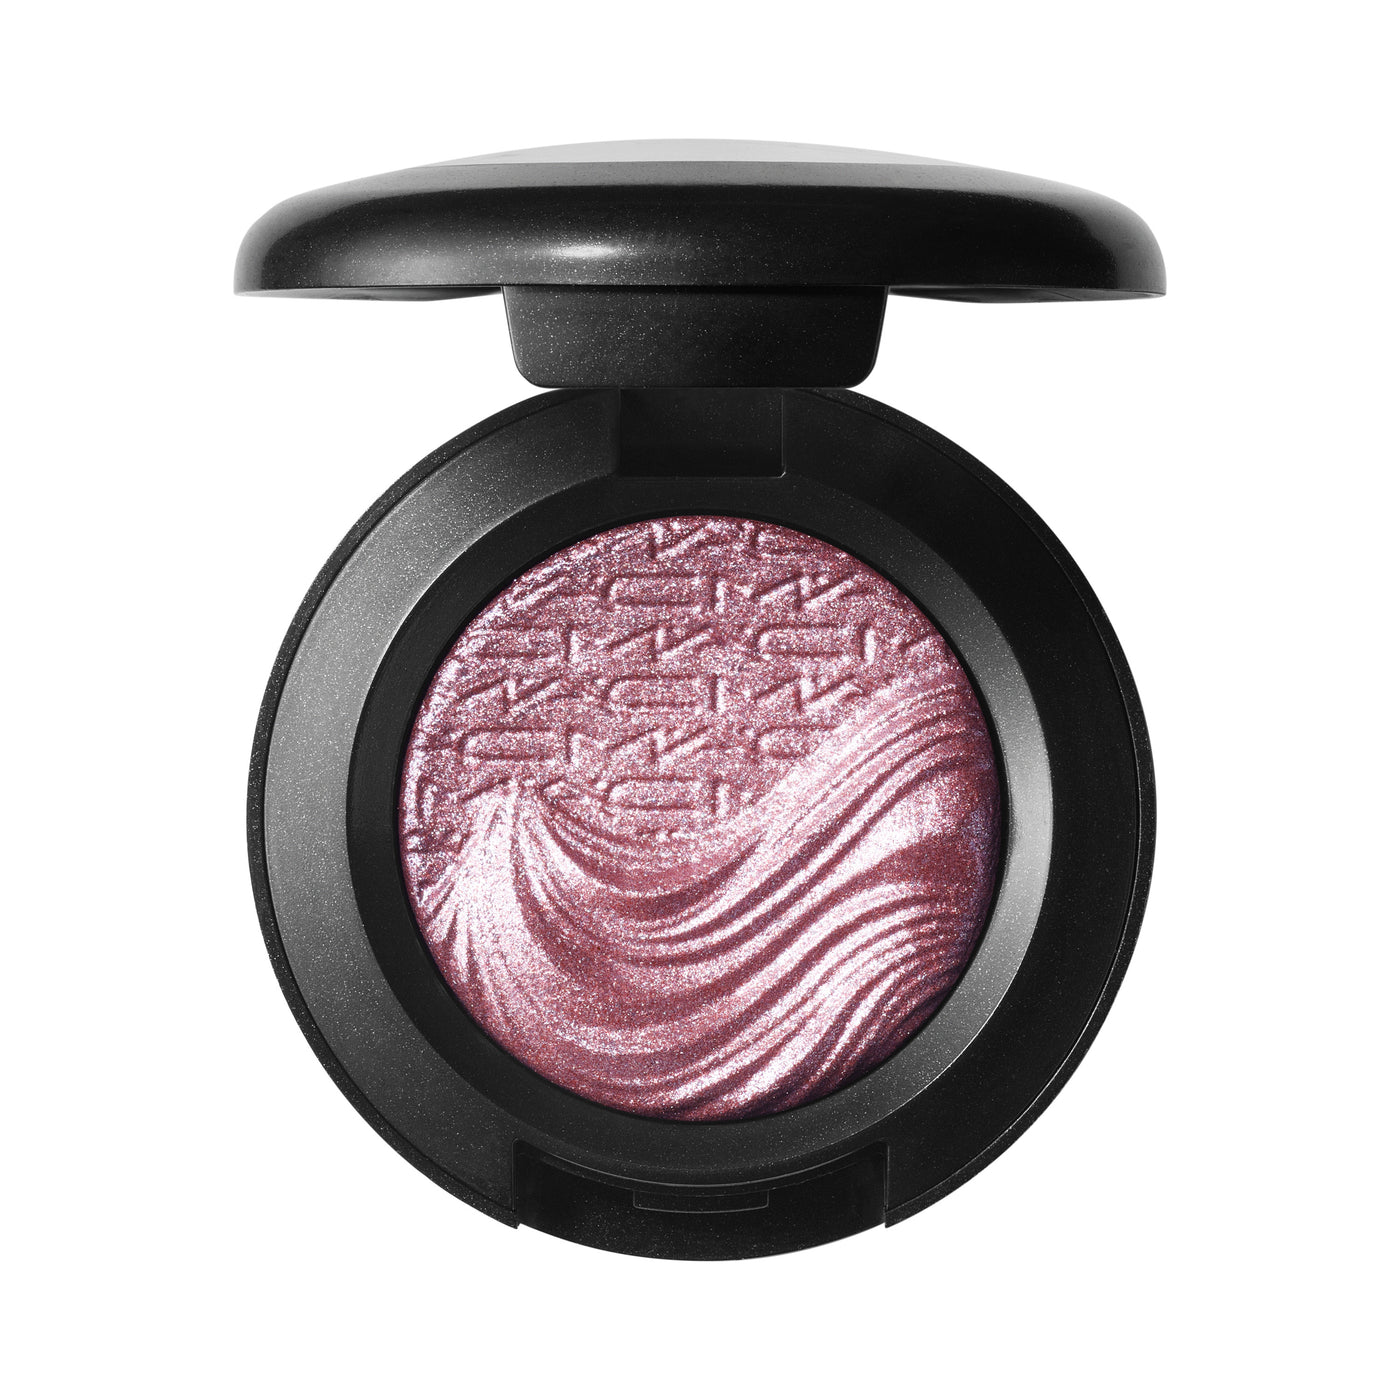 Shop The Latest Collection Of Mâ·Aâ·C Extra Dimension Eye Shadow In Lebanon